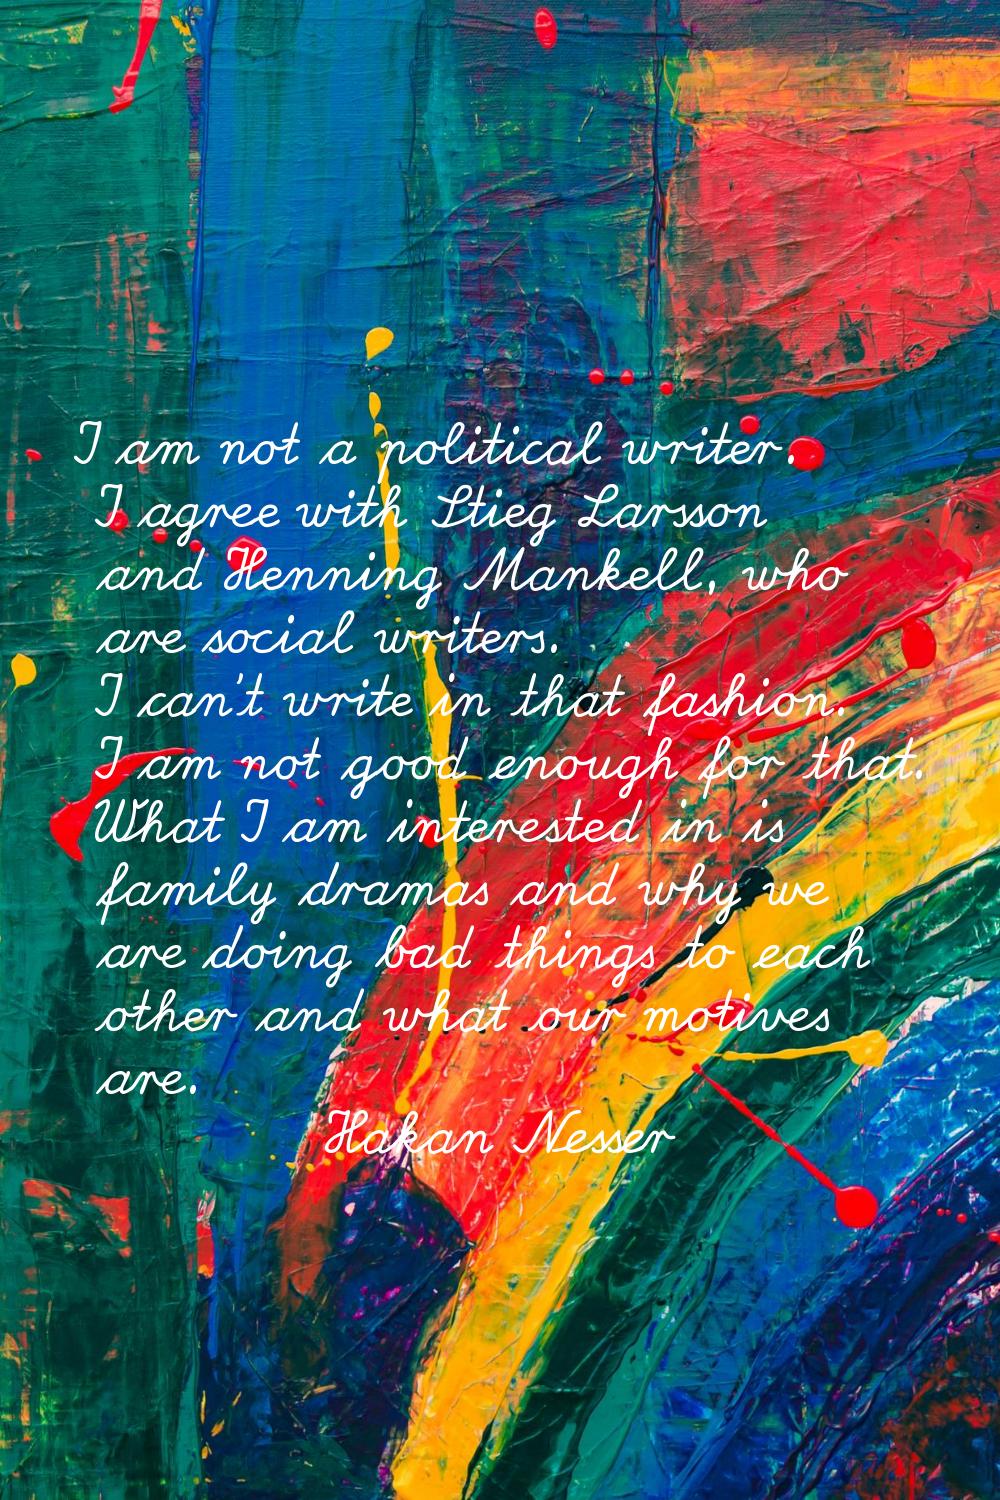 I am not a political writer. I agree with Stieg Larsson and Henning Mankell, who are social writers